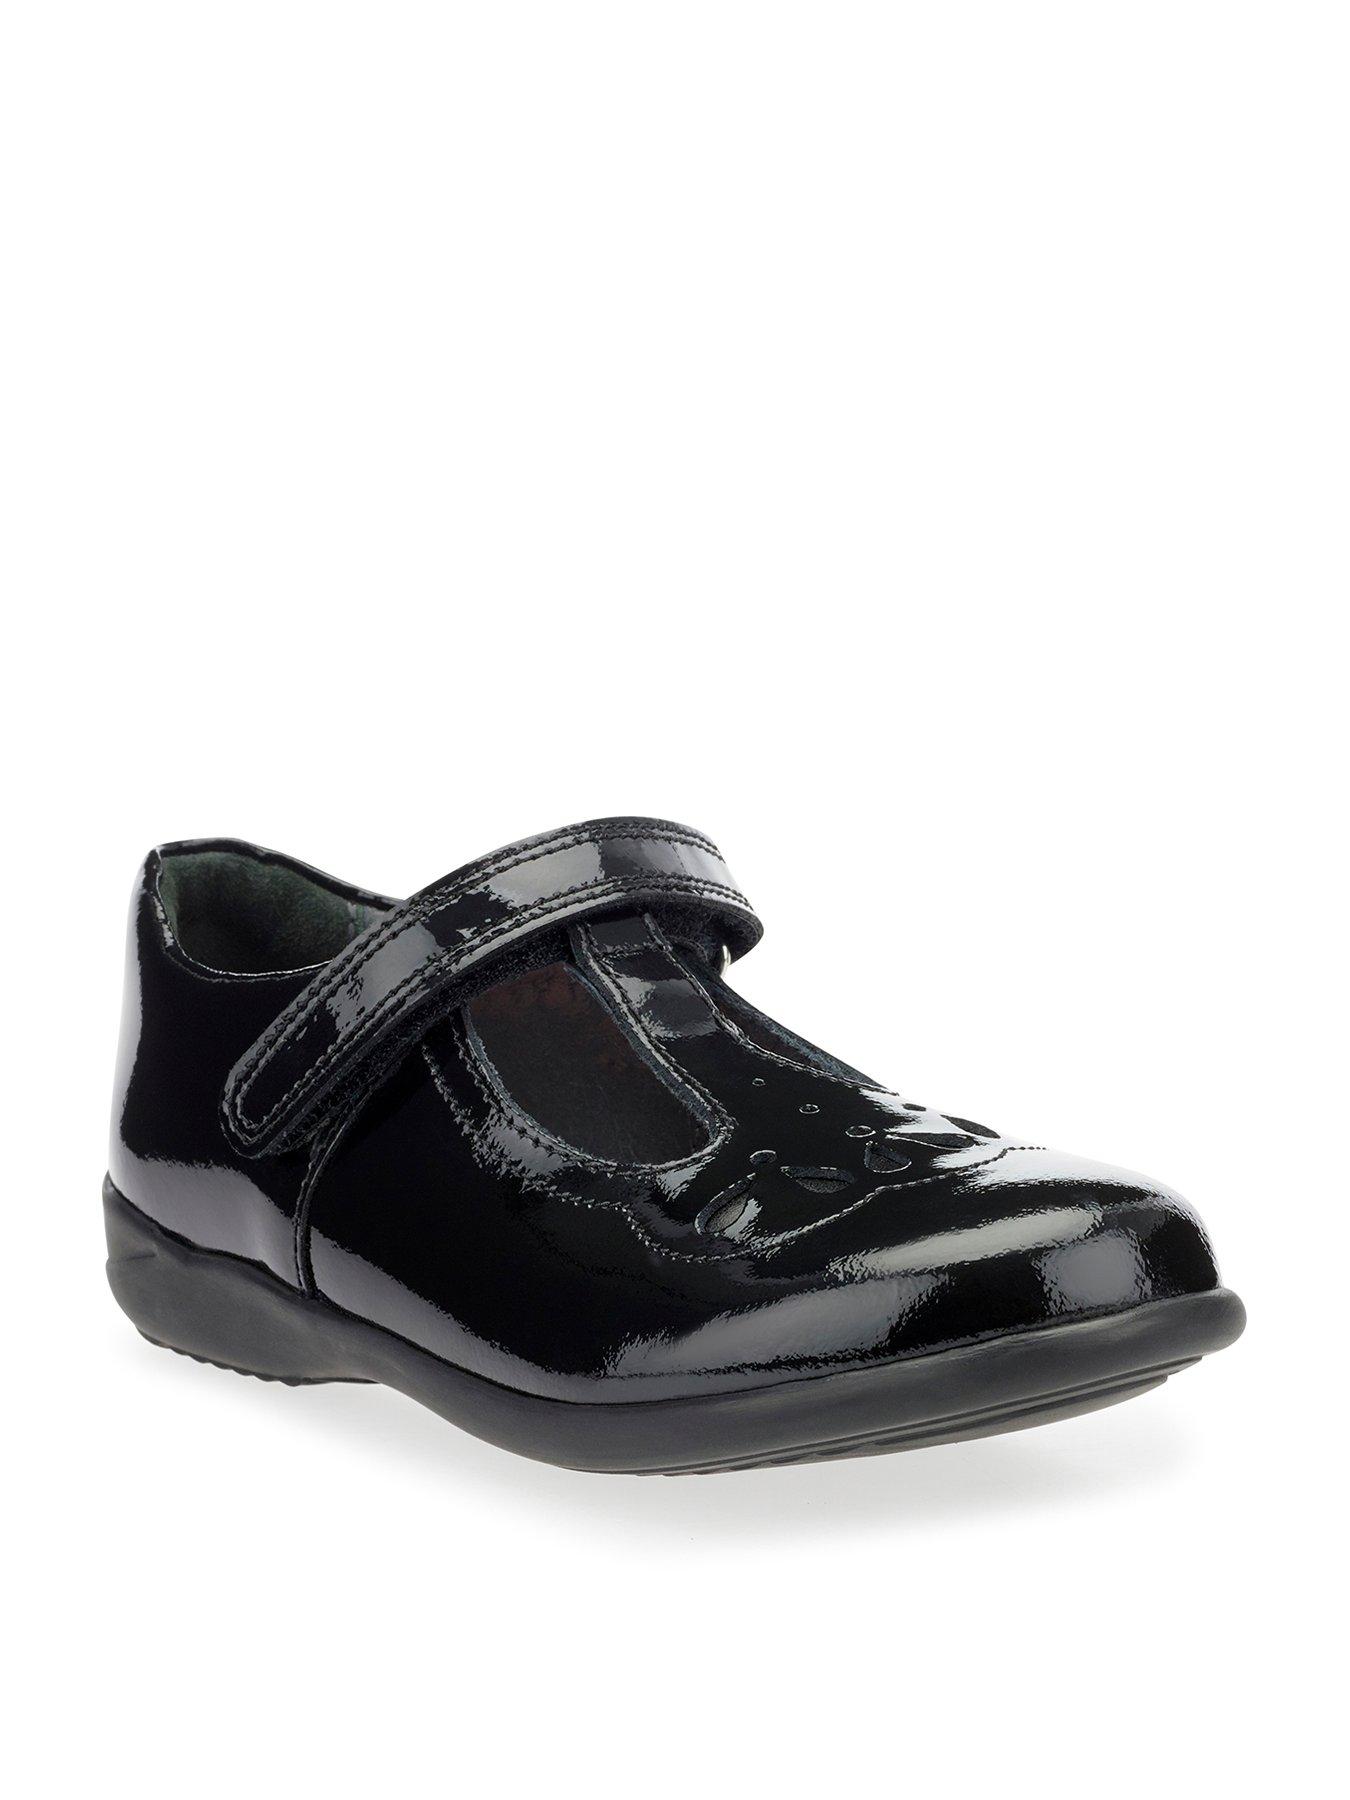  Poppy Younger Patent Strap School Shoes - Black